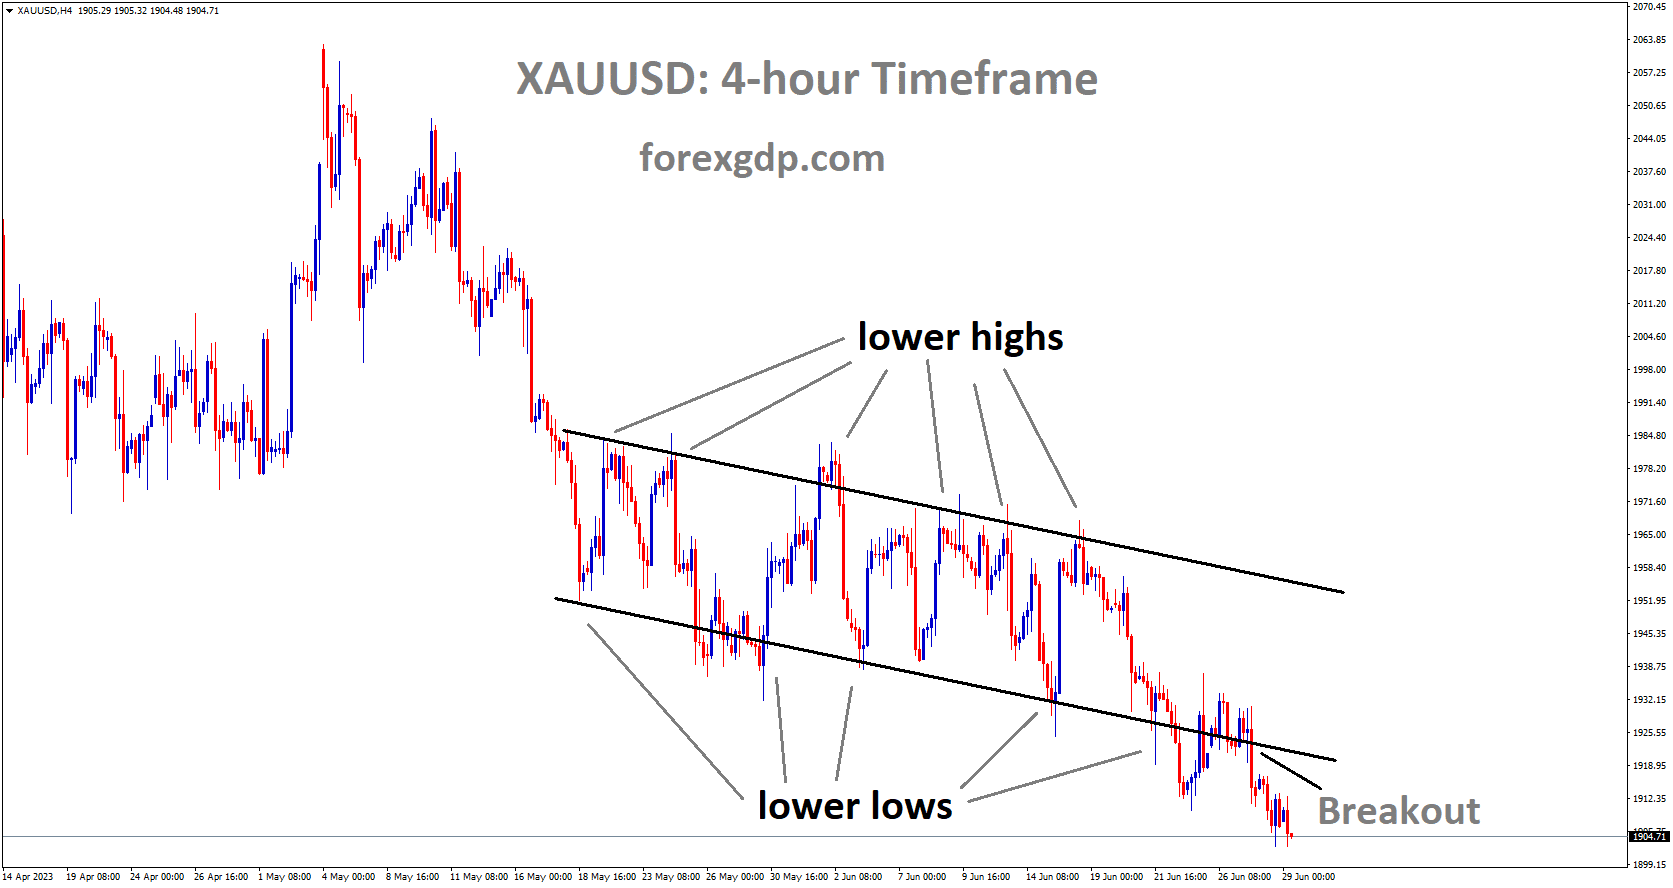 XAUUSD Gold is moving in descending channel pattern and the market has broken at the lower low area of the channel.